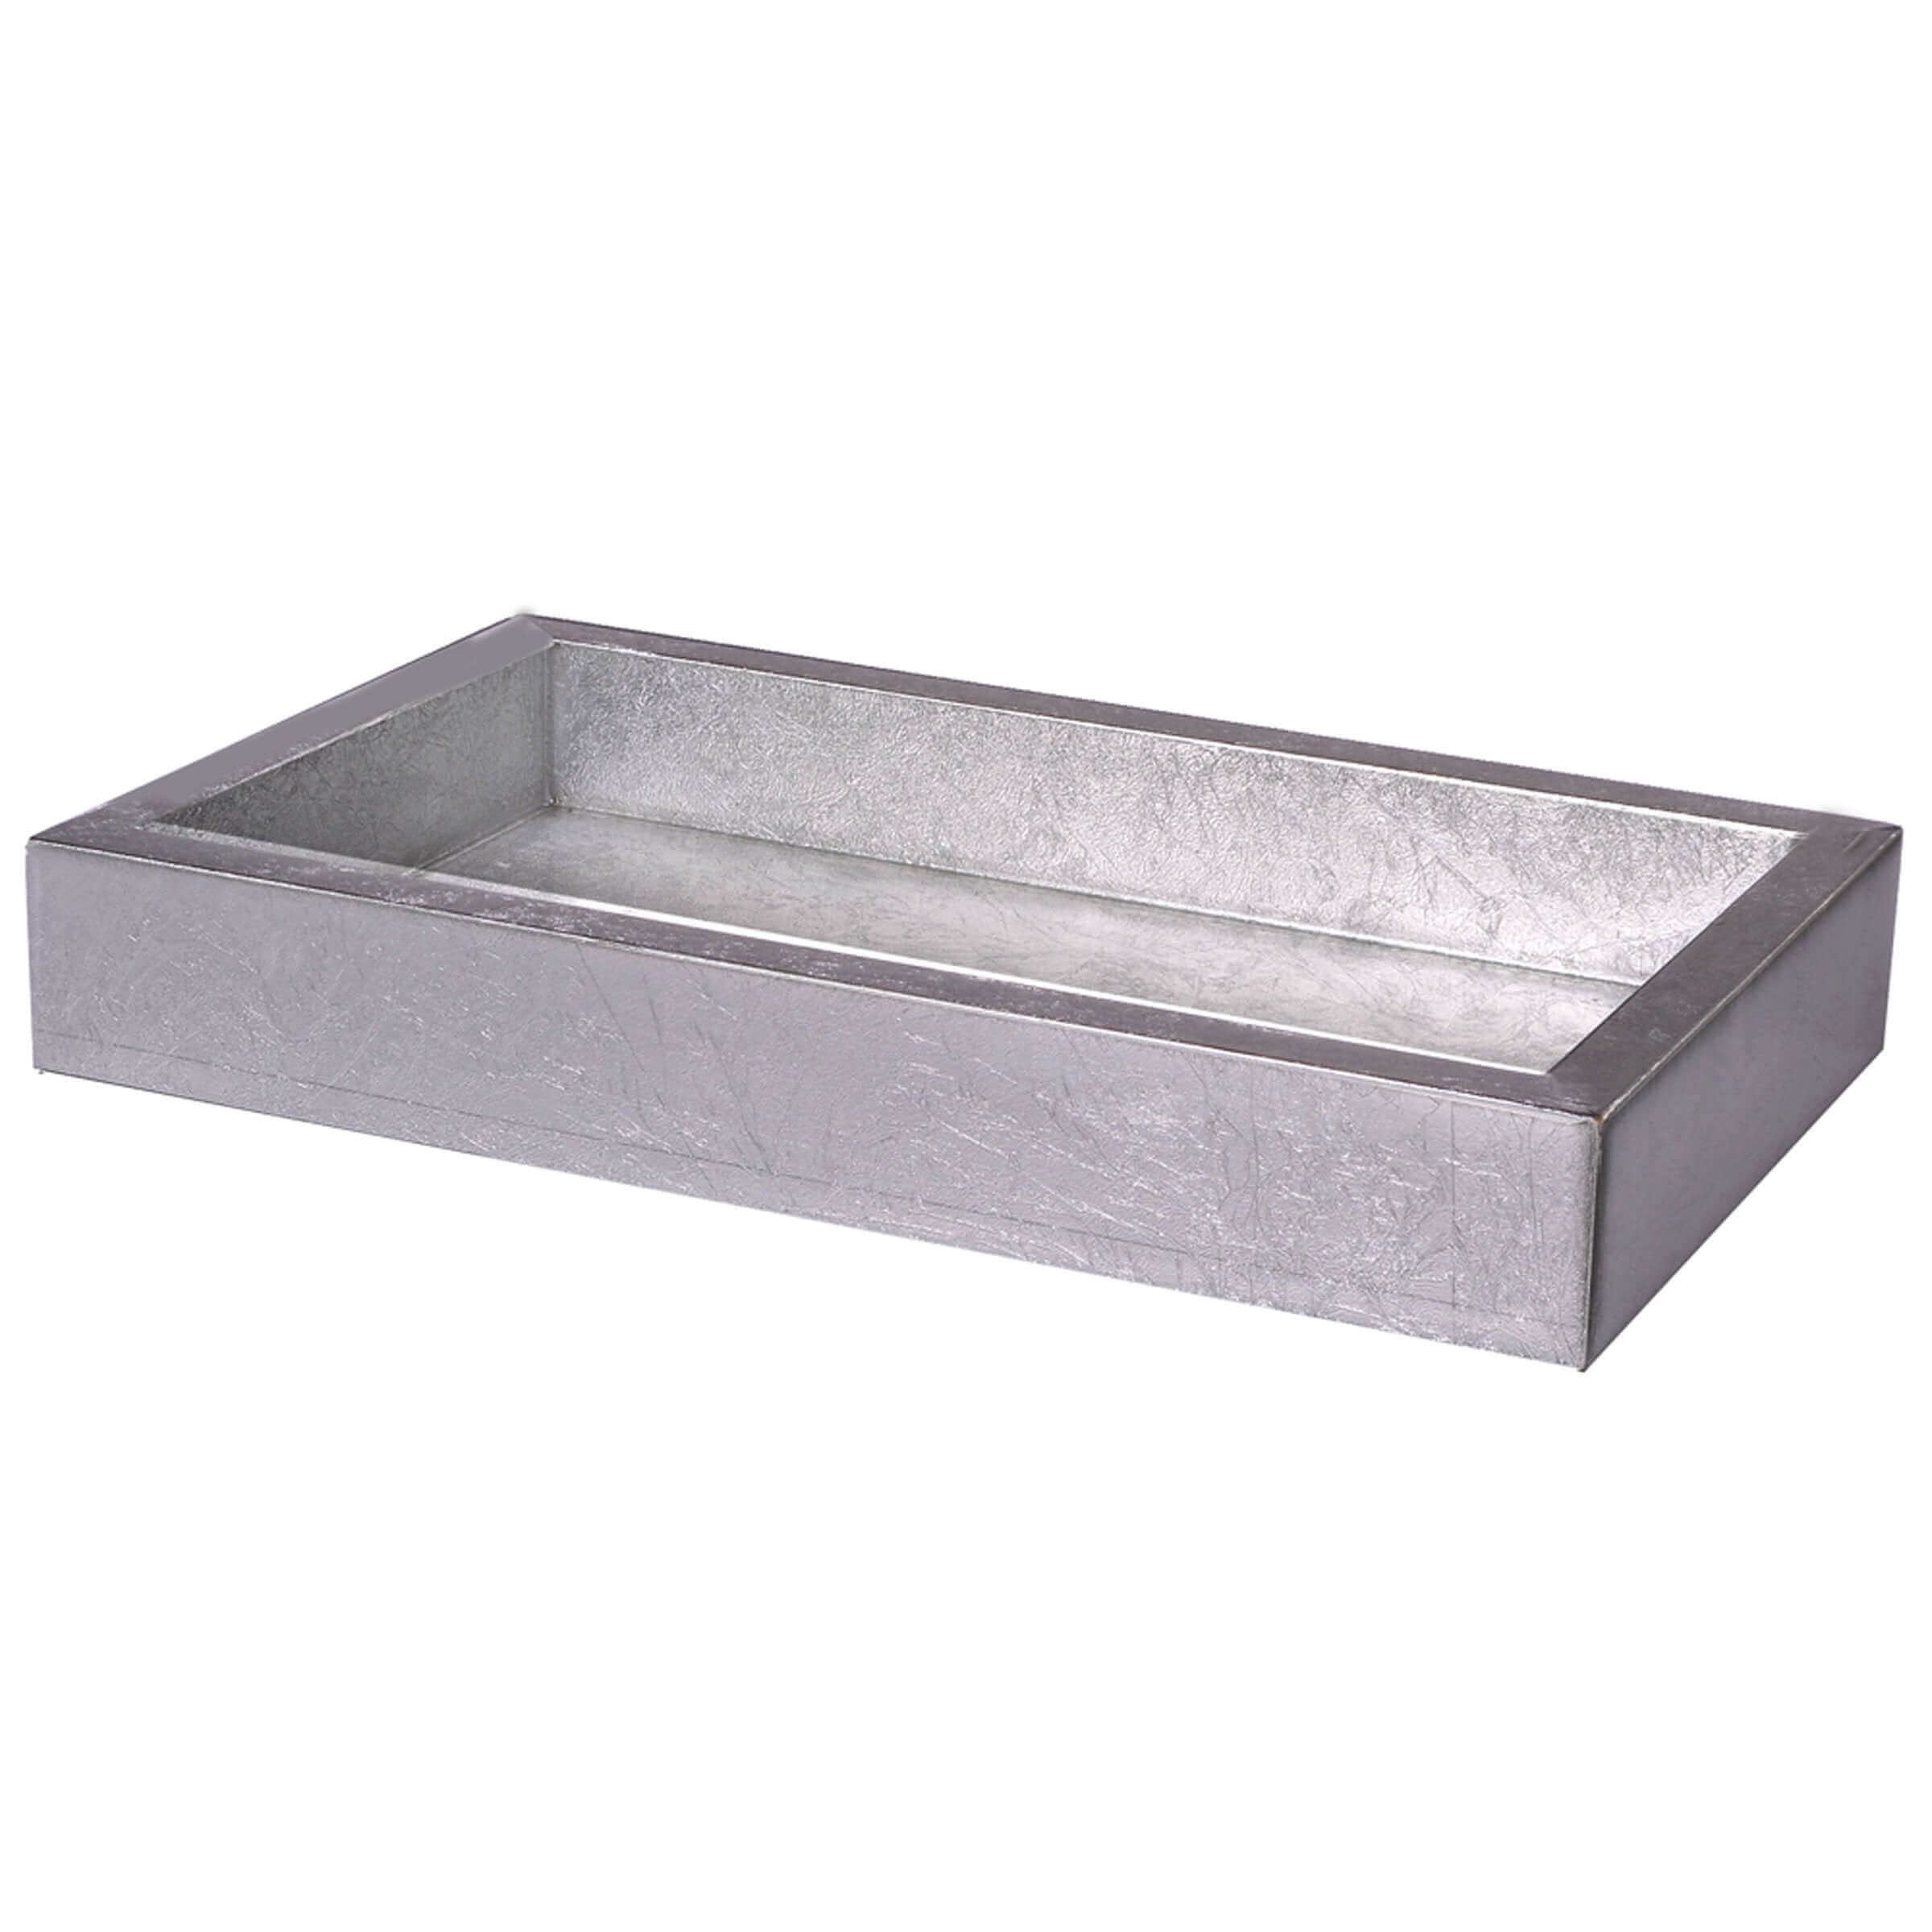 Mike + Ally - EOS Silver Vanity Tray - 32094S - Silver - 